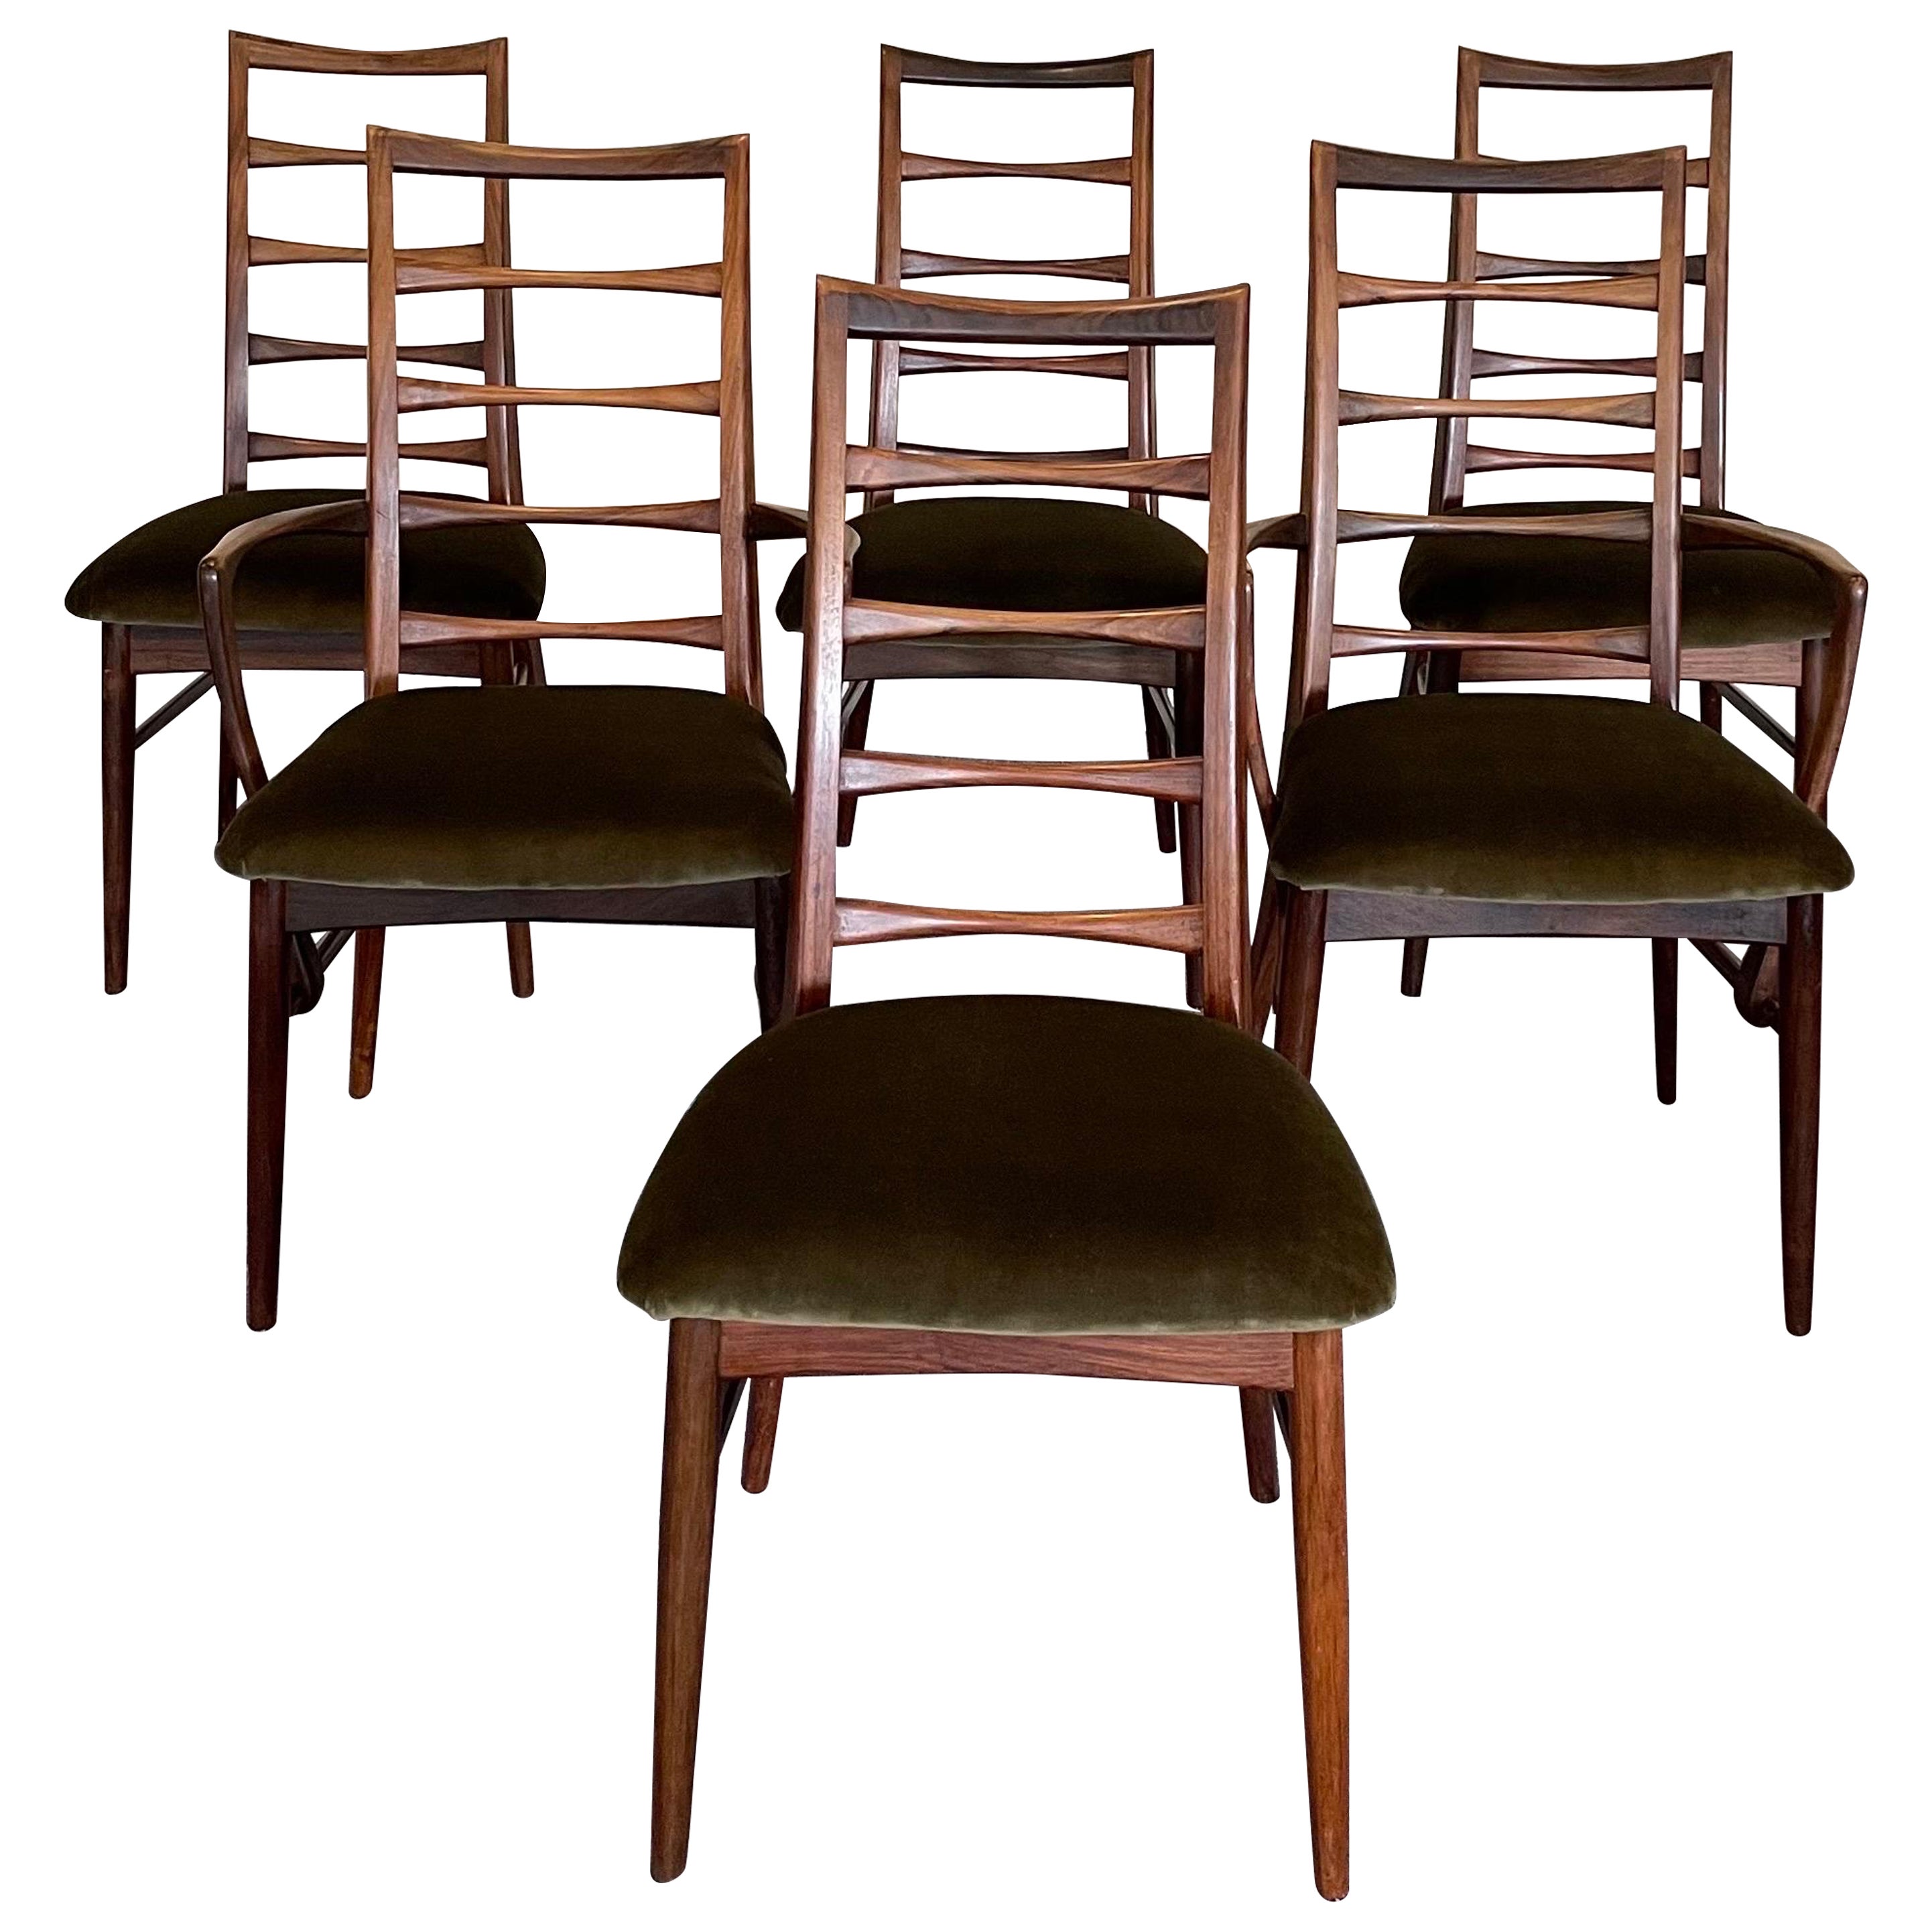 1960s Niels Koefoed "Lis" Brazilian Rosewood & Mohair Dining Chairs- Set of 6